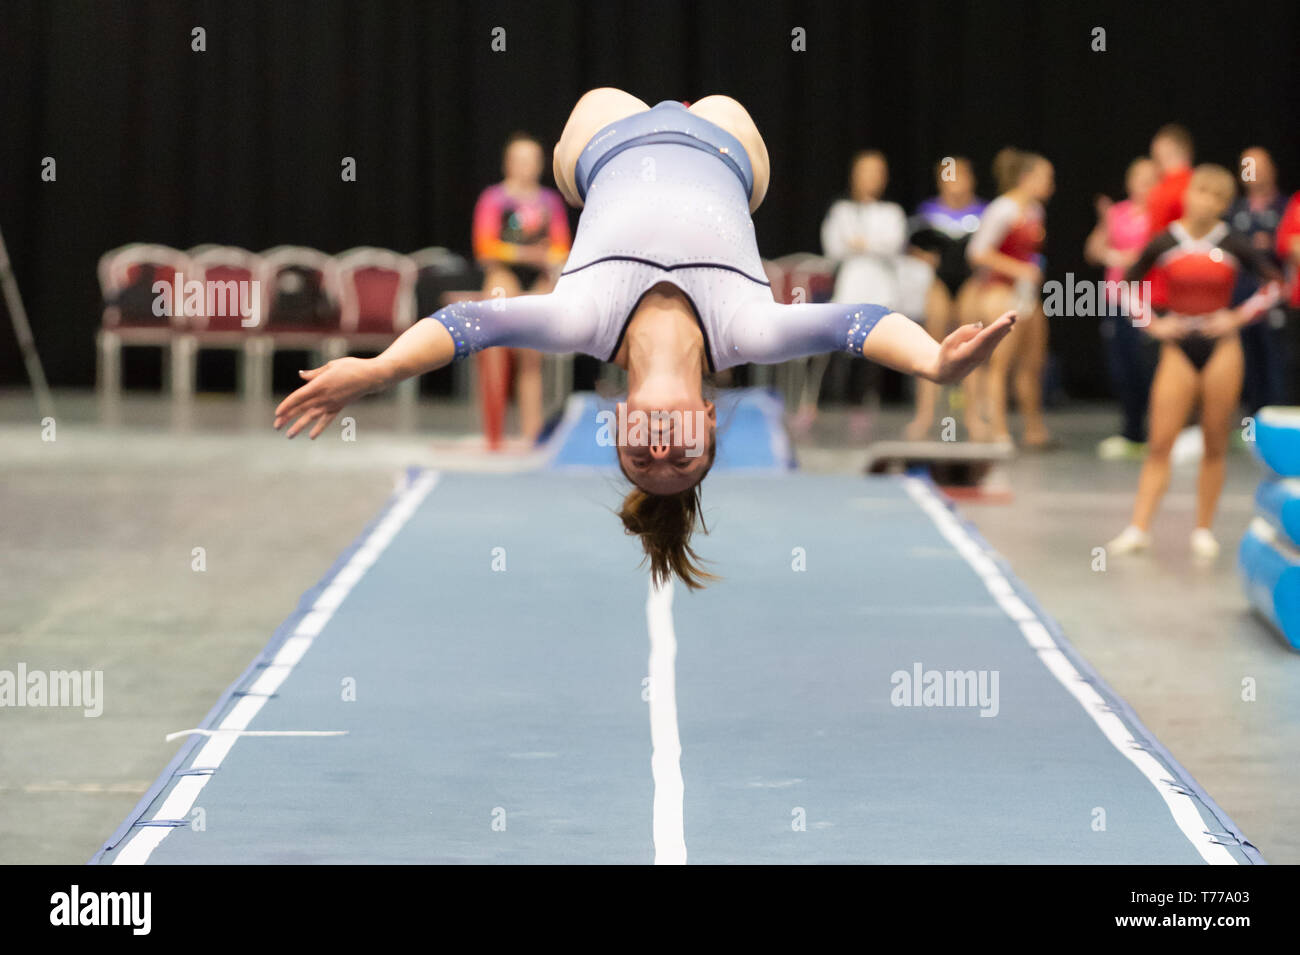 Telford, England, UK. 27 April, 2018. A female gymnast from Pinewood Gymnastics Club in action during Spring Series 1 at the Telford International Centre, Telford, UK. Stock Photo